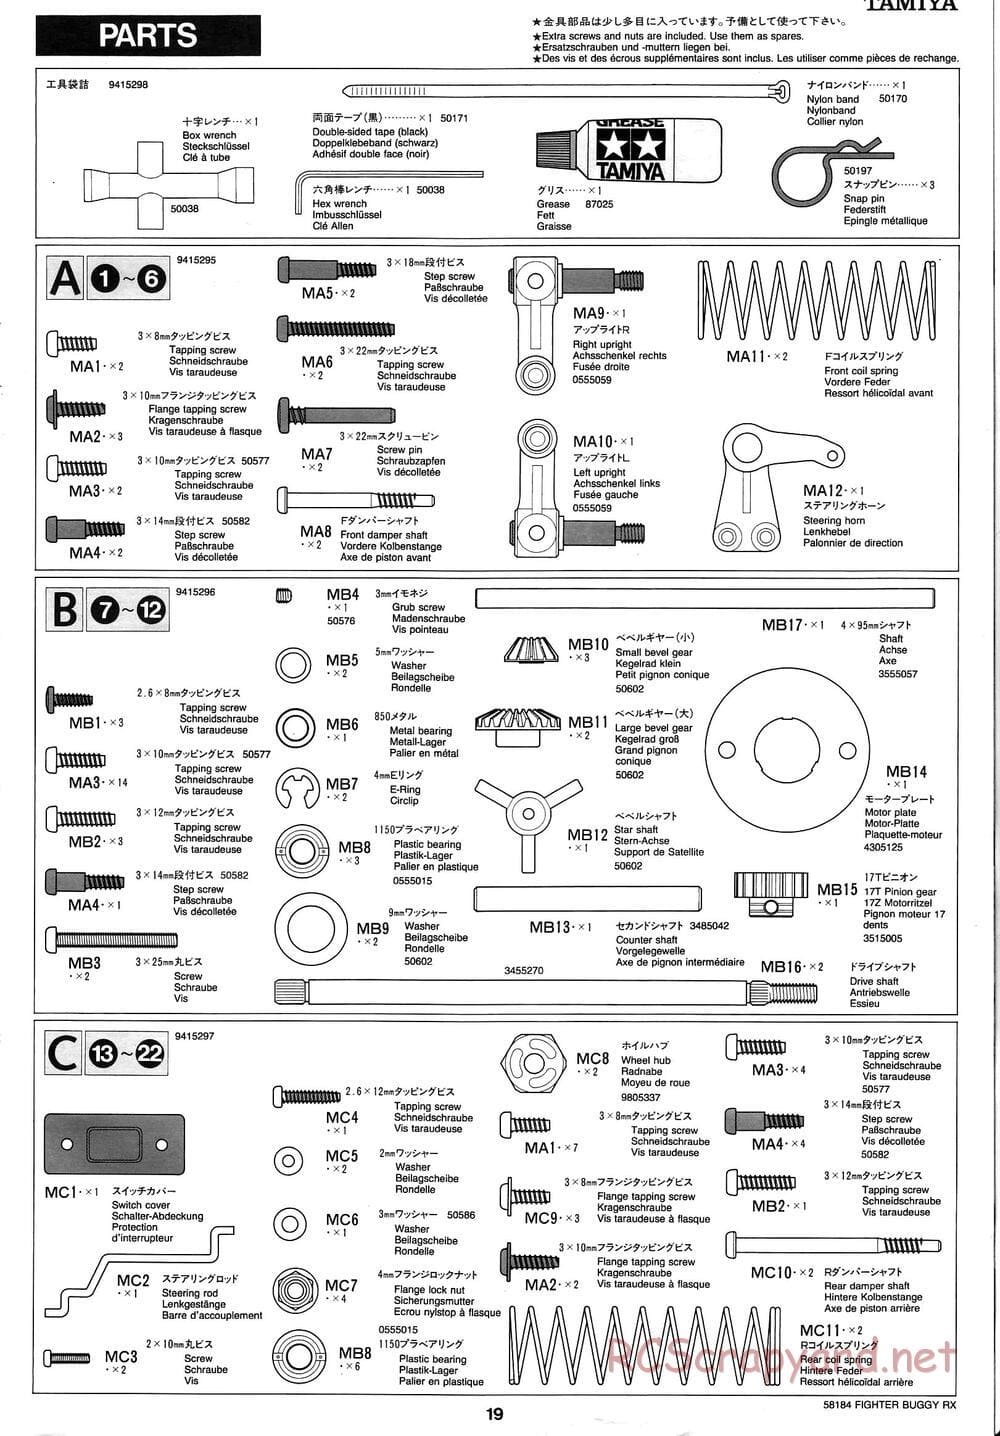 Tamiya - Fighter Buggy RX Chassis - Manual - Page 19